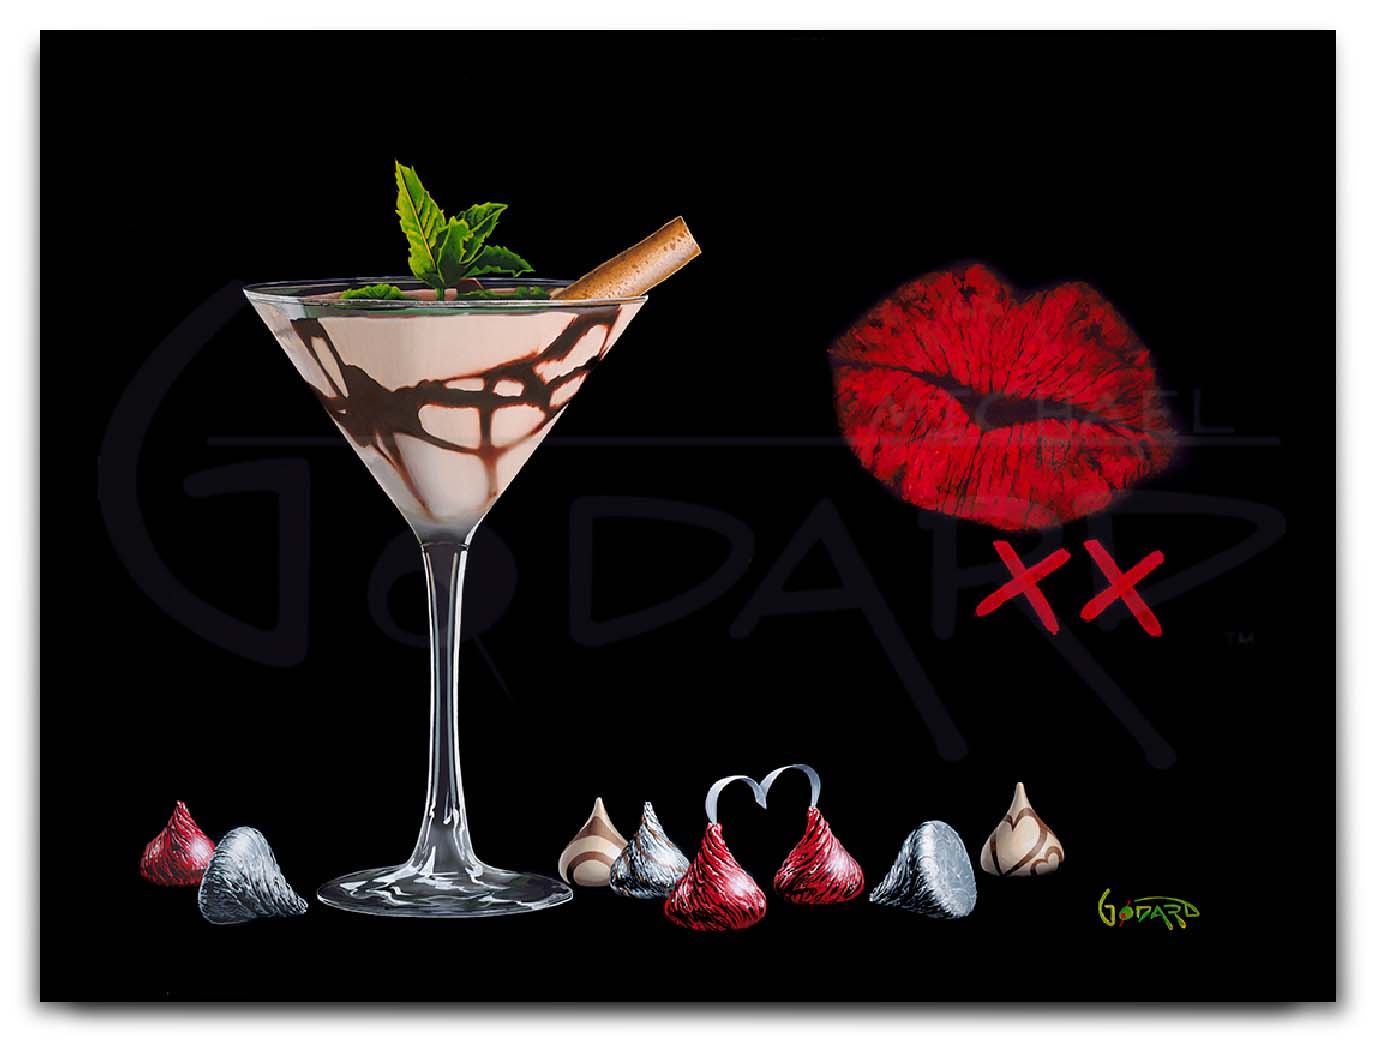 Michael Godard "Chocolate Kisses" Limited Edition Giclee